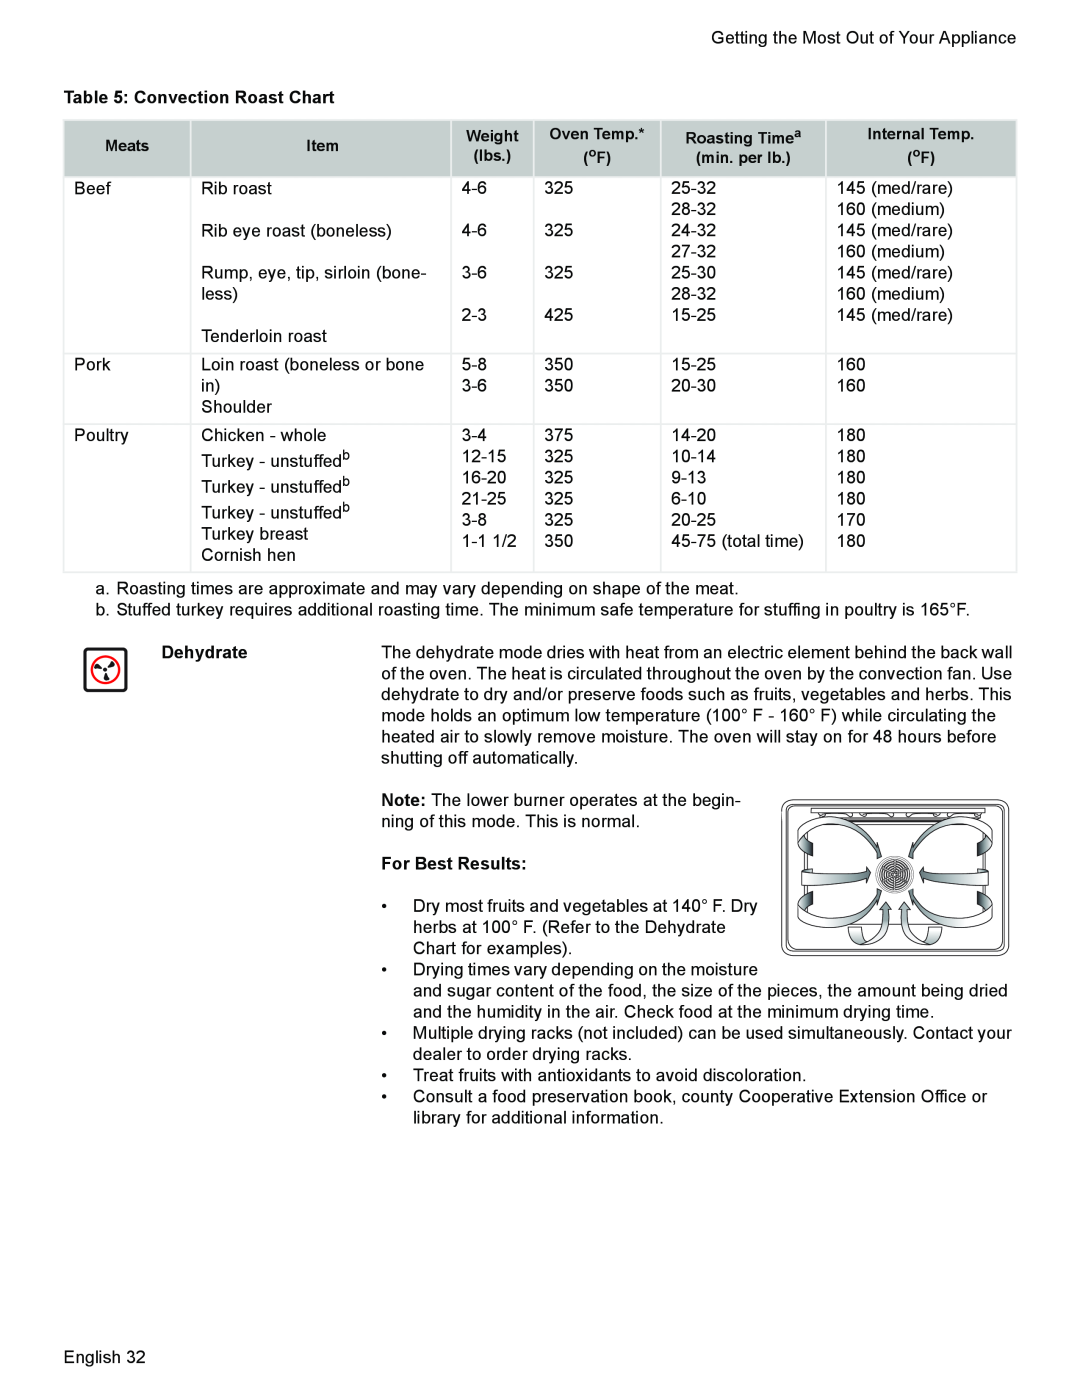 Siemens HG2528UC, HG2425UC manual Convection Roast Chart, Dehydrate, For Best Results 